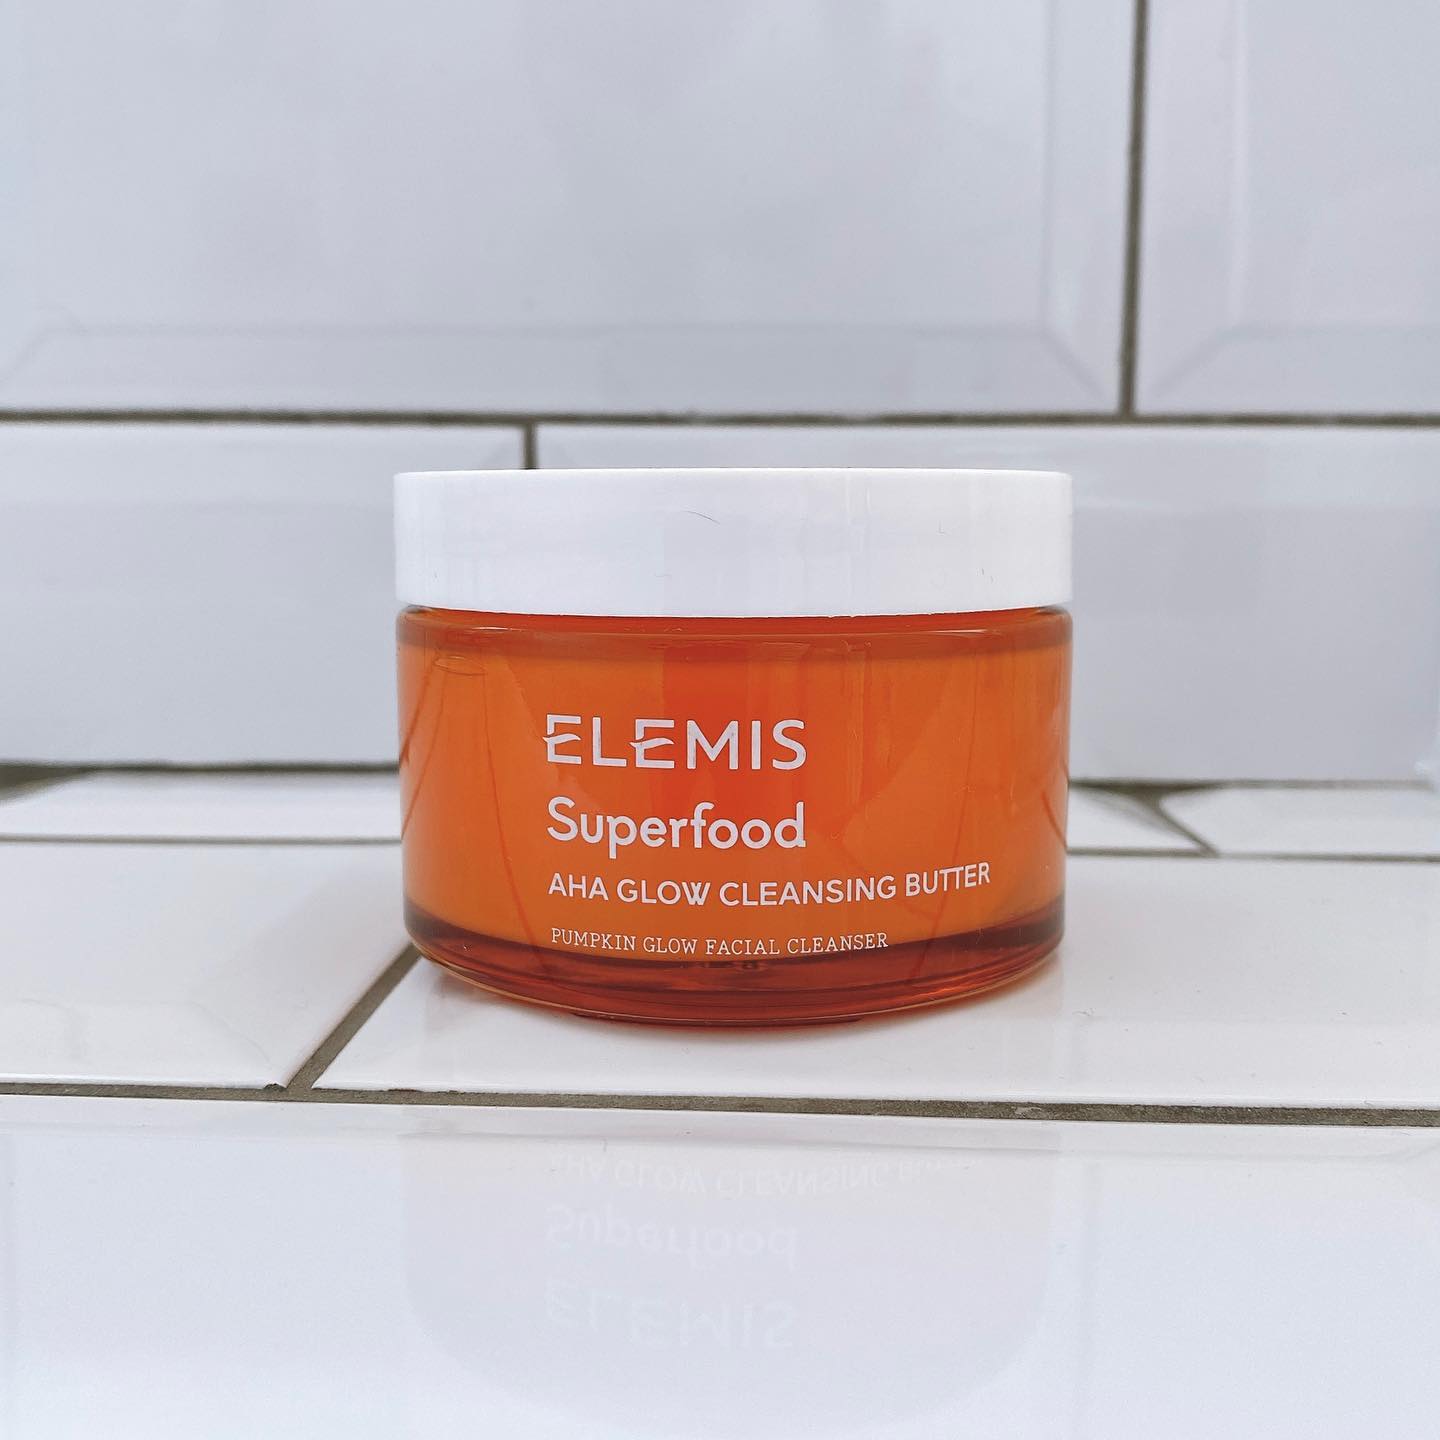 Elemis Superfood AHA Glow Cleansing Butter